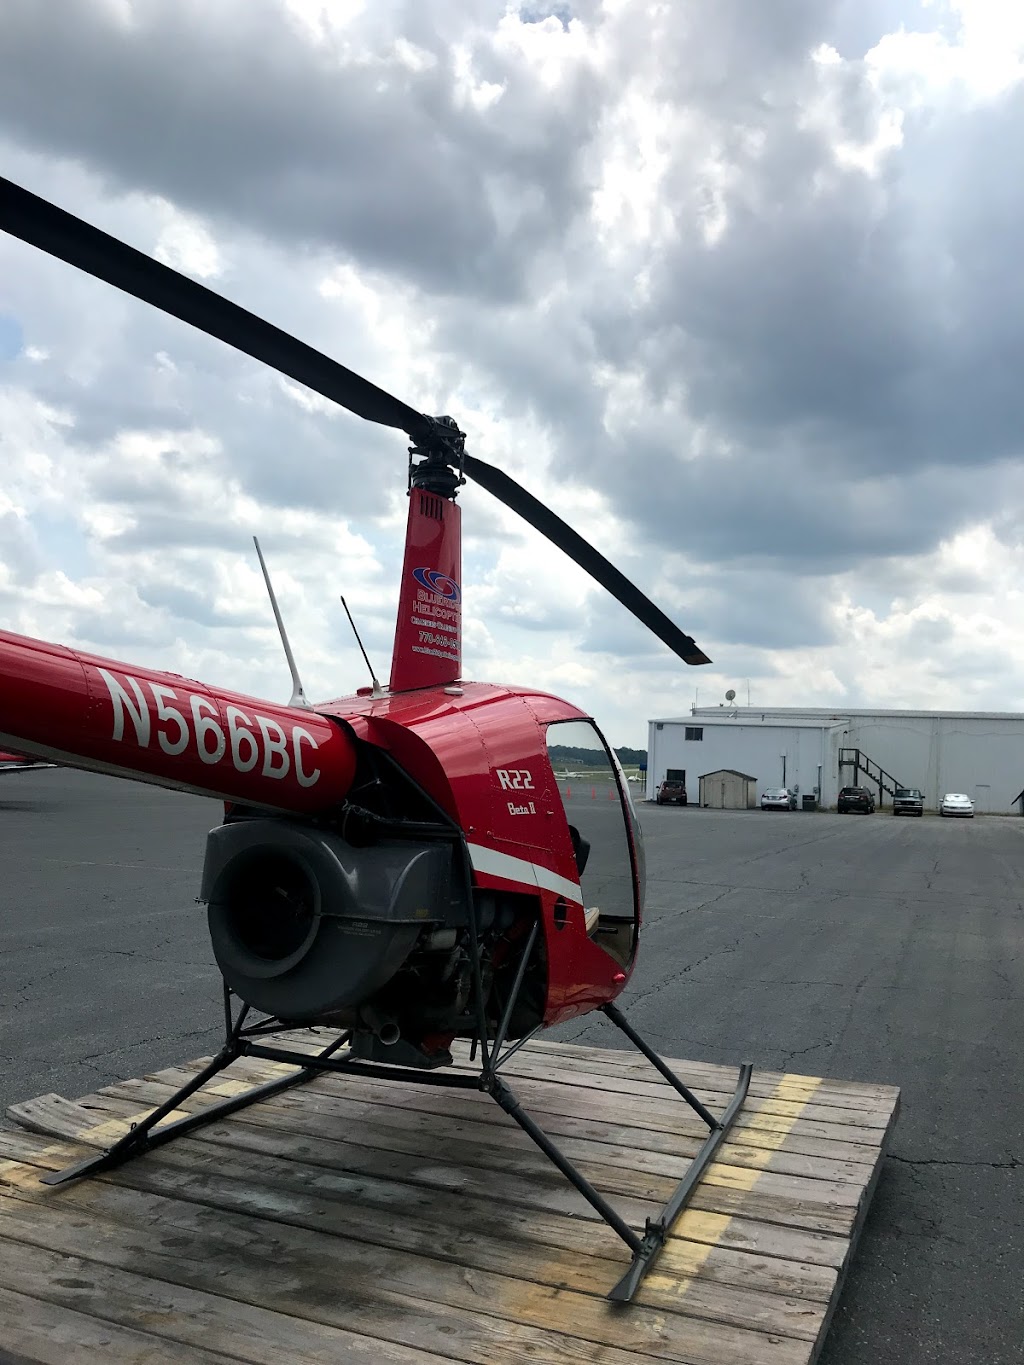 Blue Ridge Helicopter Inc | 850 Airport Rd, Lawrenceville, GA 30045 | Phone: (770) 963-0590